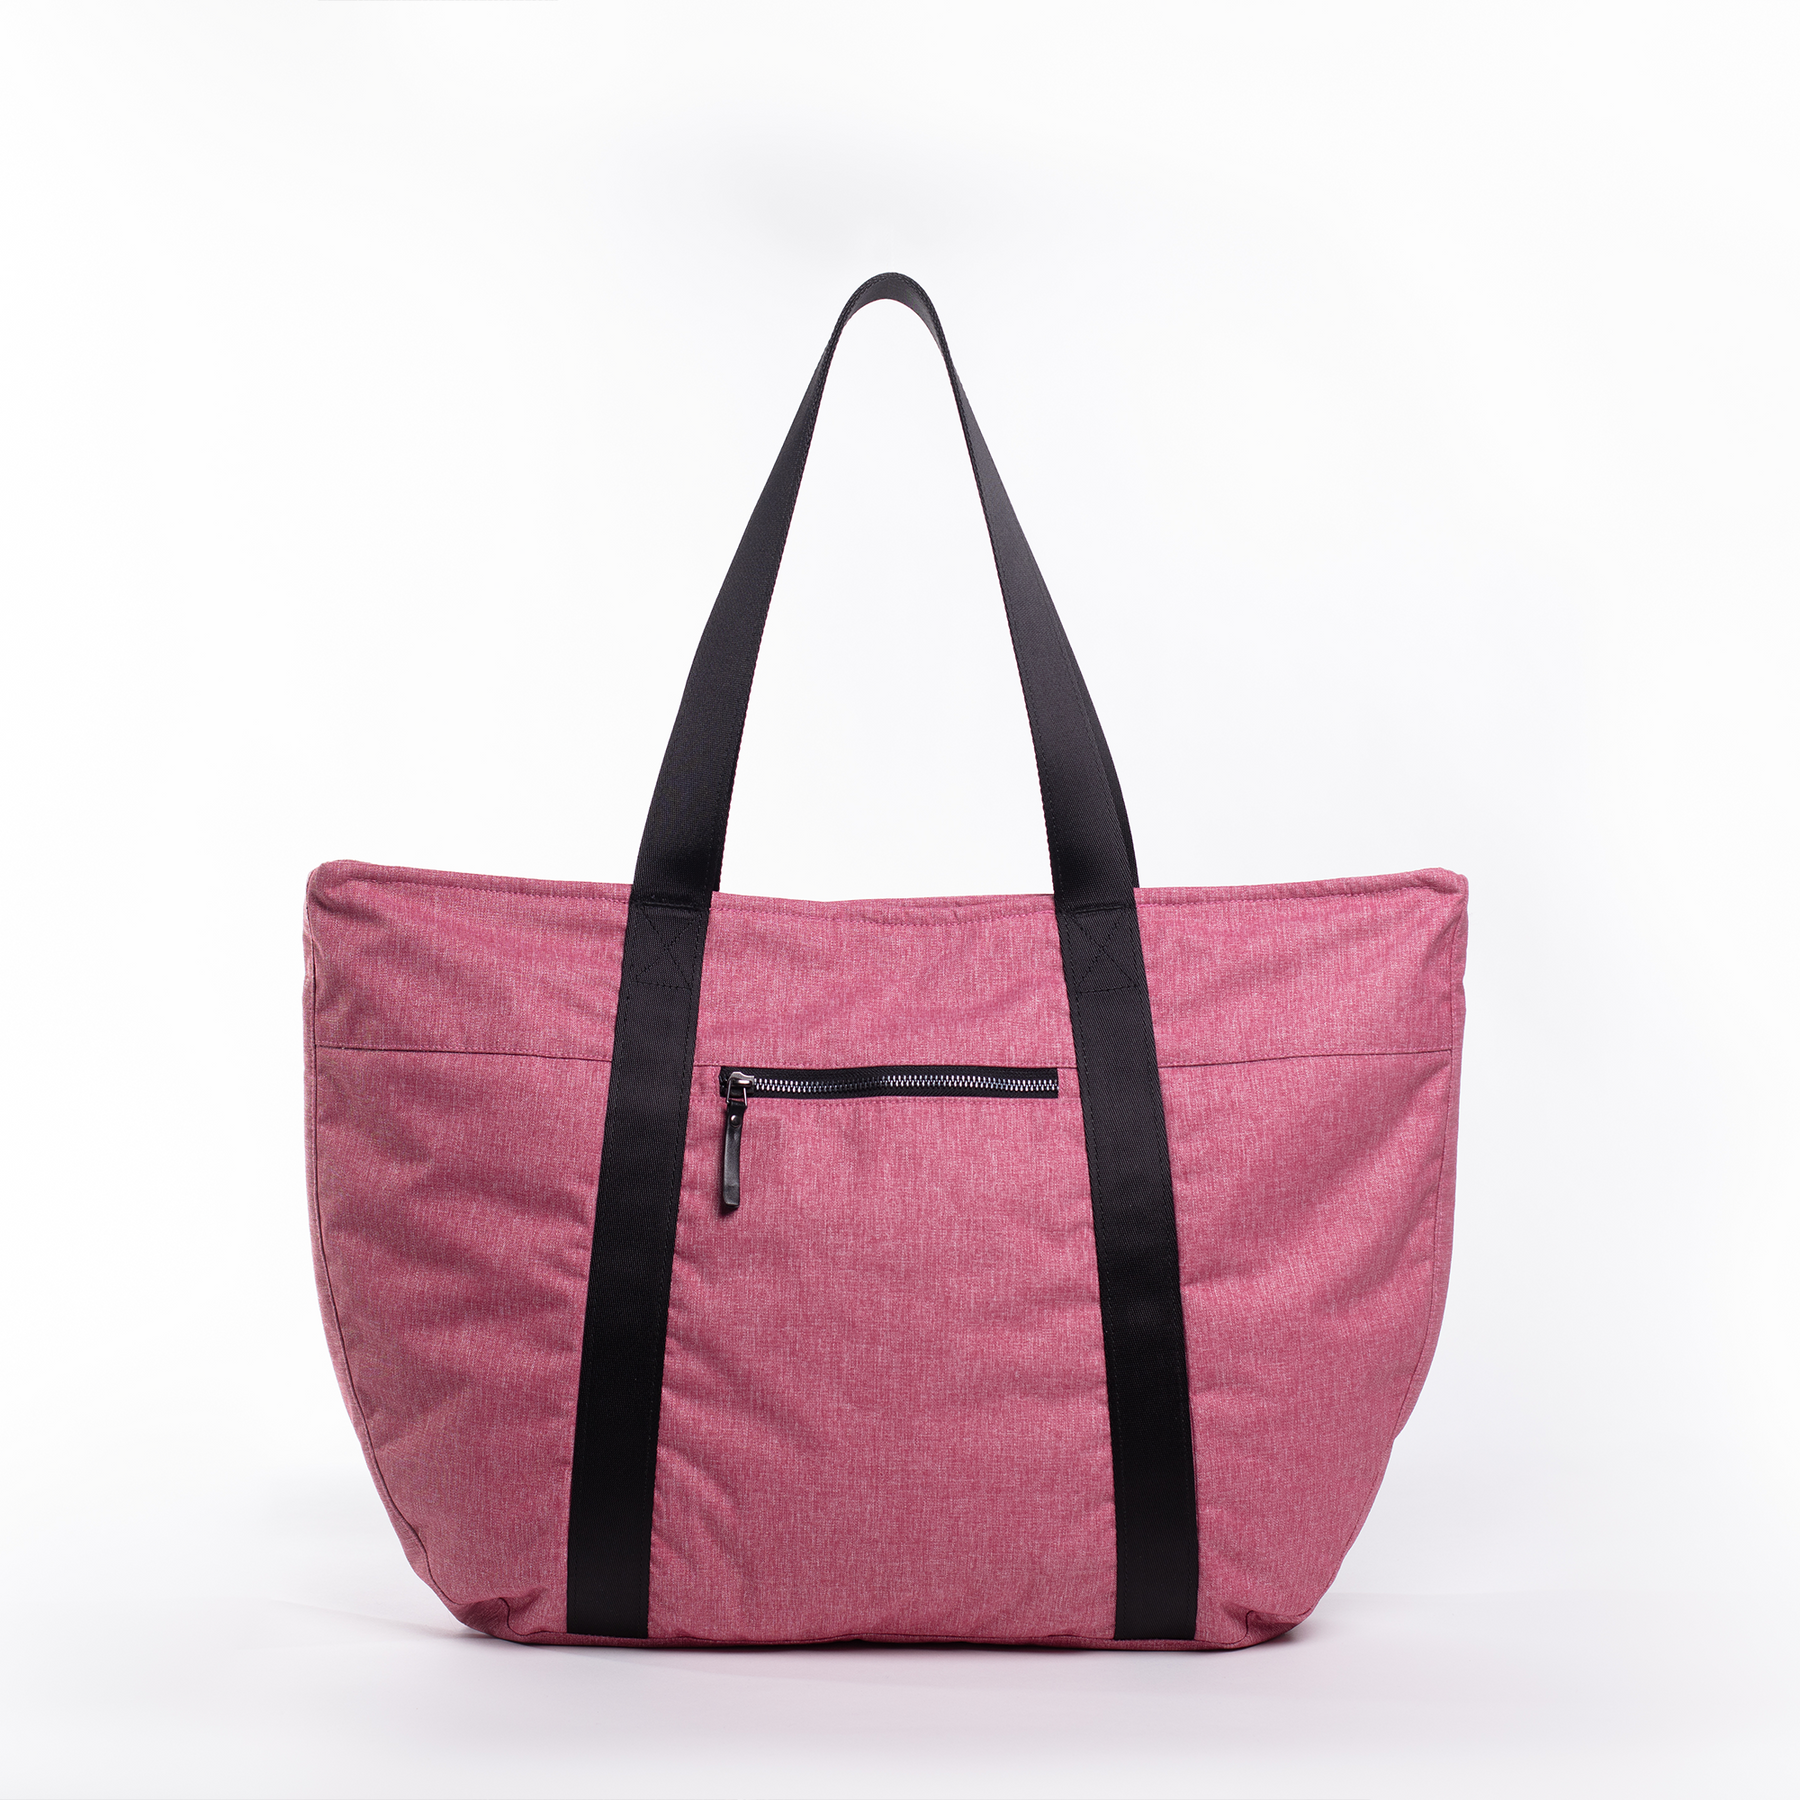 Women's Yoga Tote Bag, Oversized, Recycled Nylon/Polyester, Water